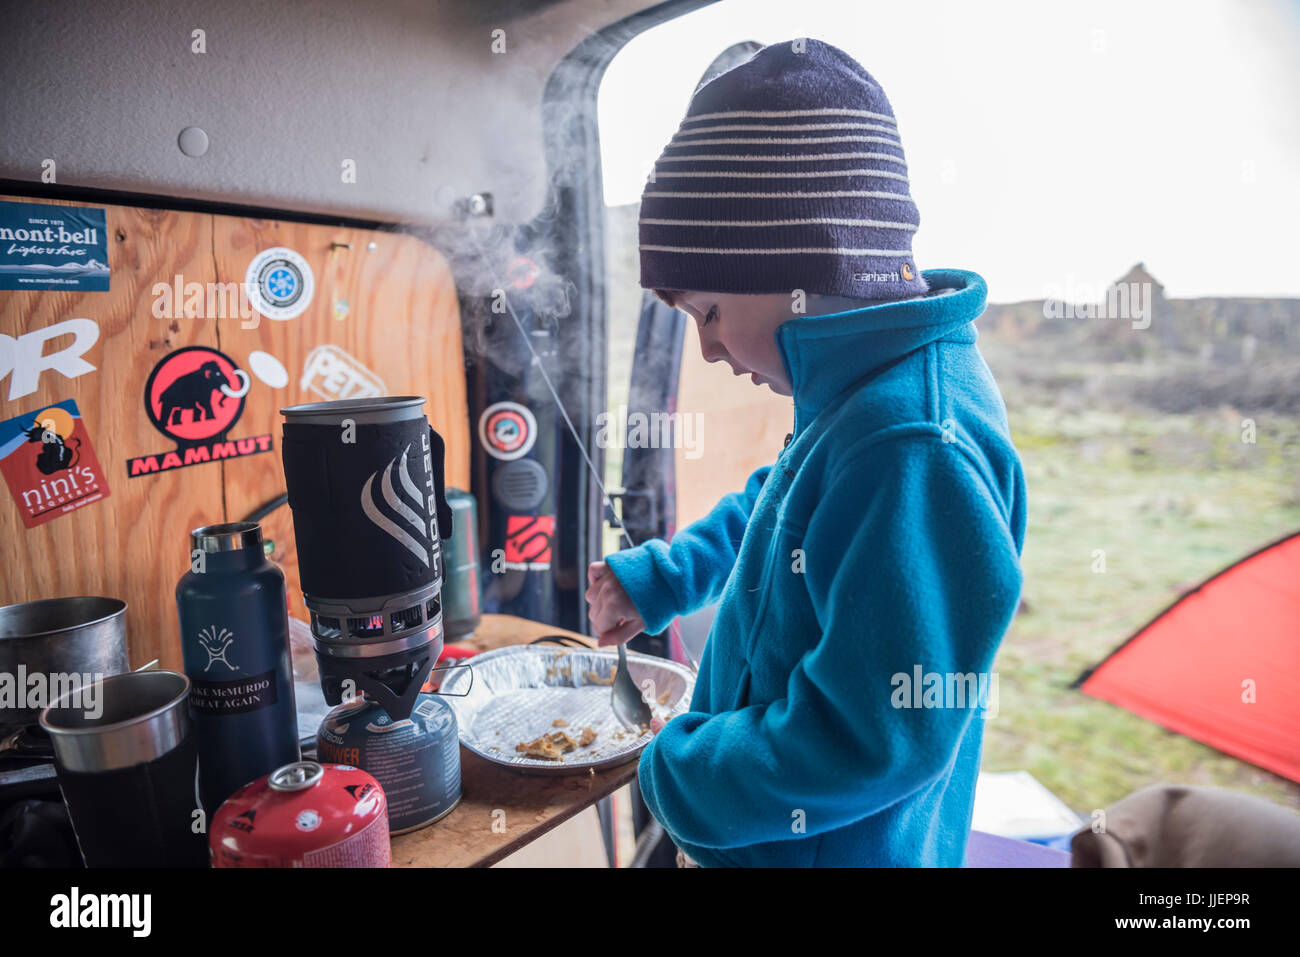 A young boy finishes the last few crumbs of pie crust during a camping trip. Stock Photo